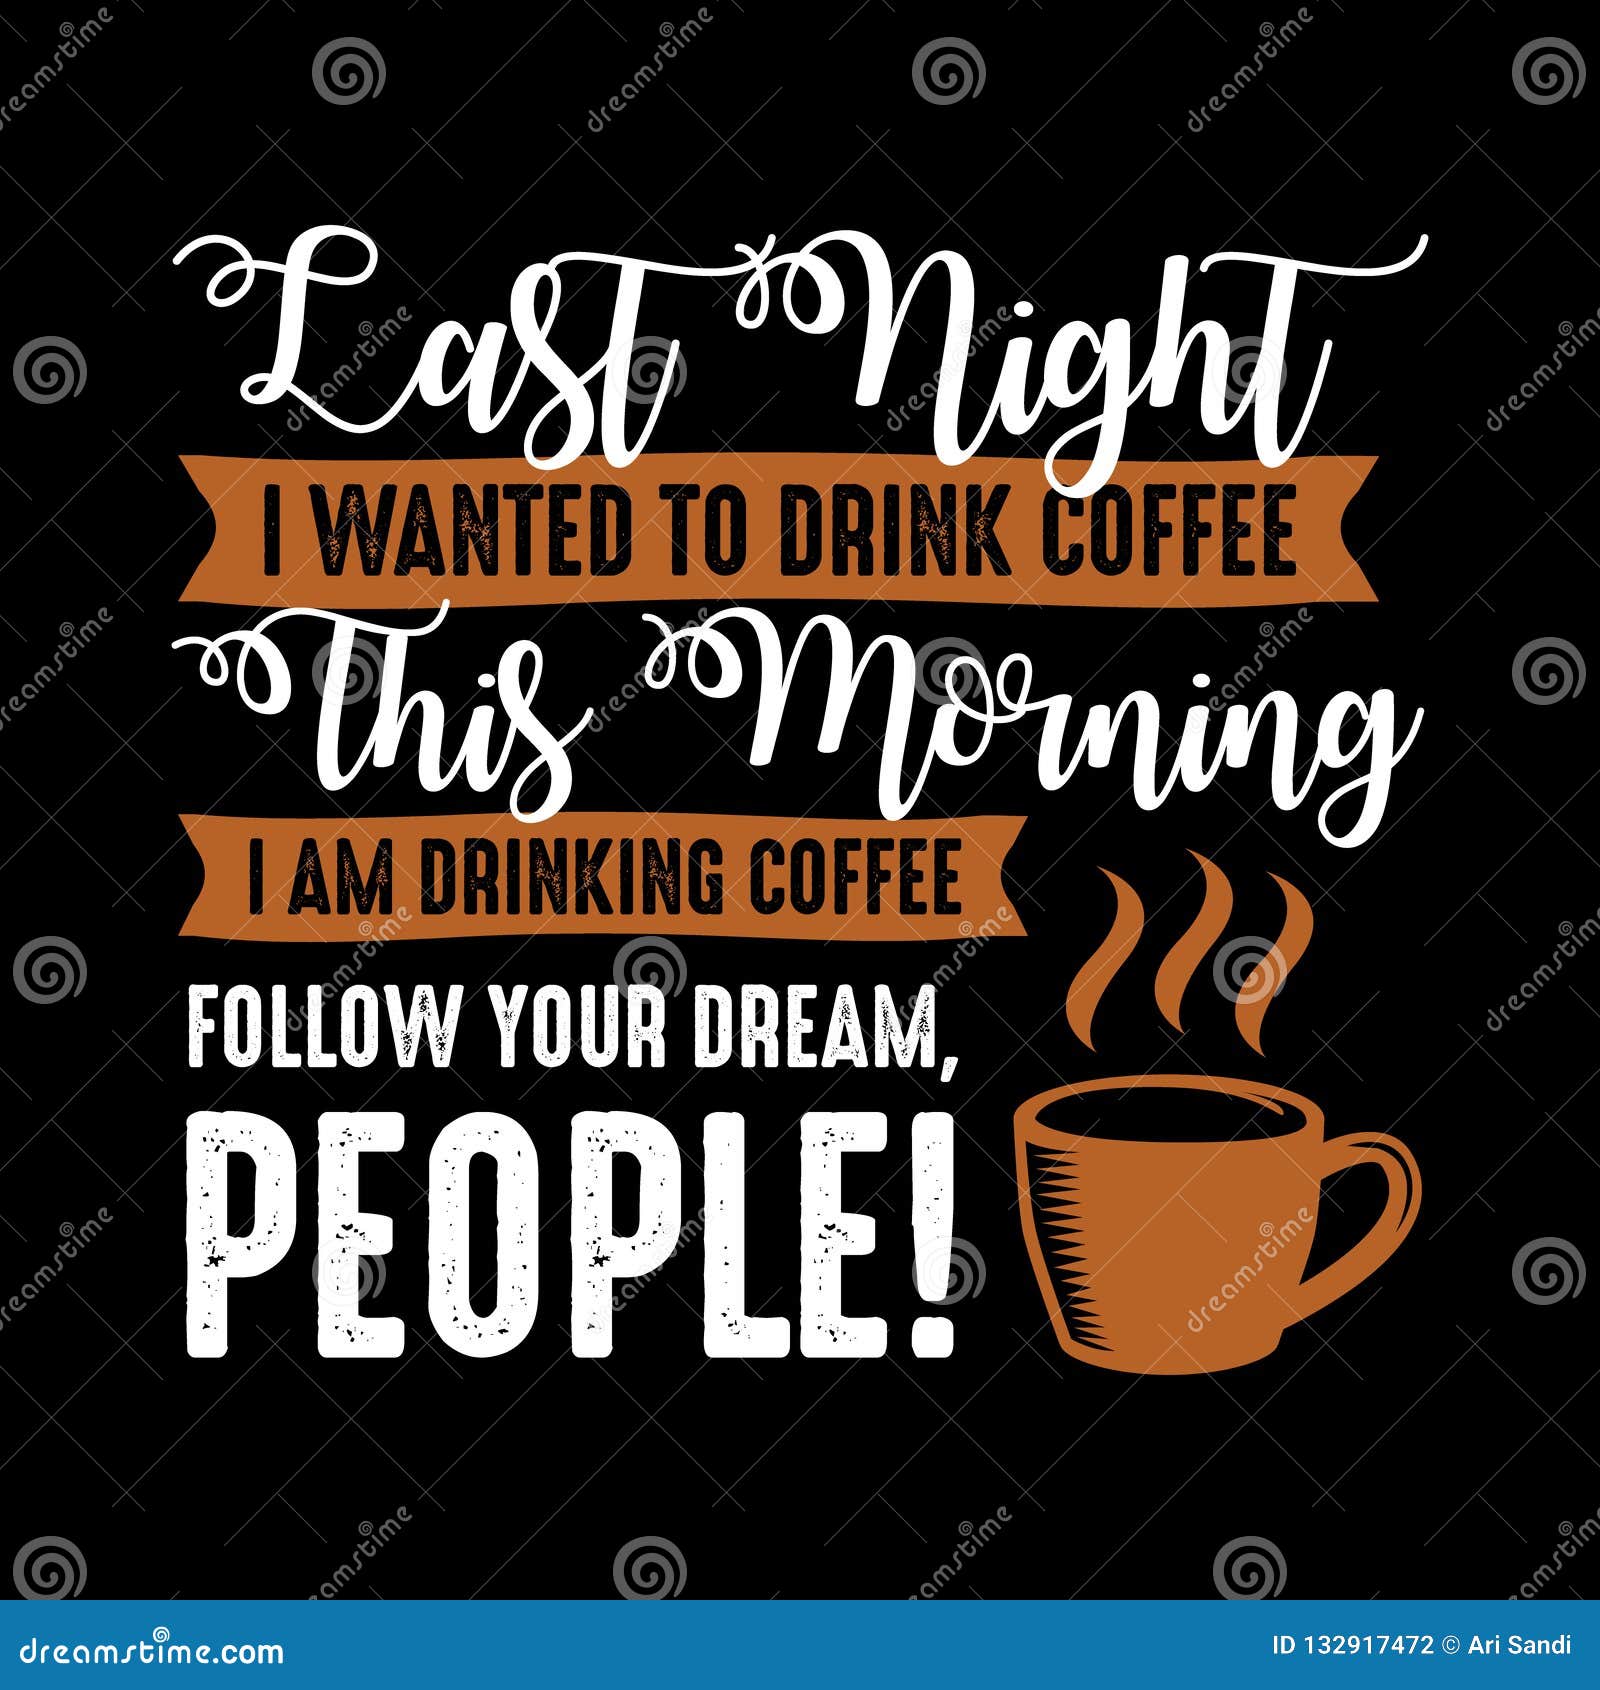 funny coffee quotes graphics